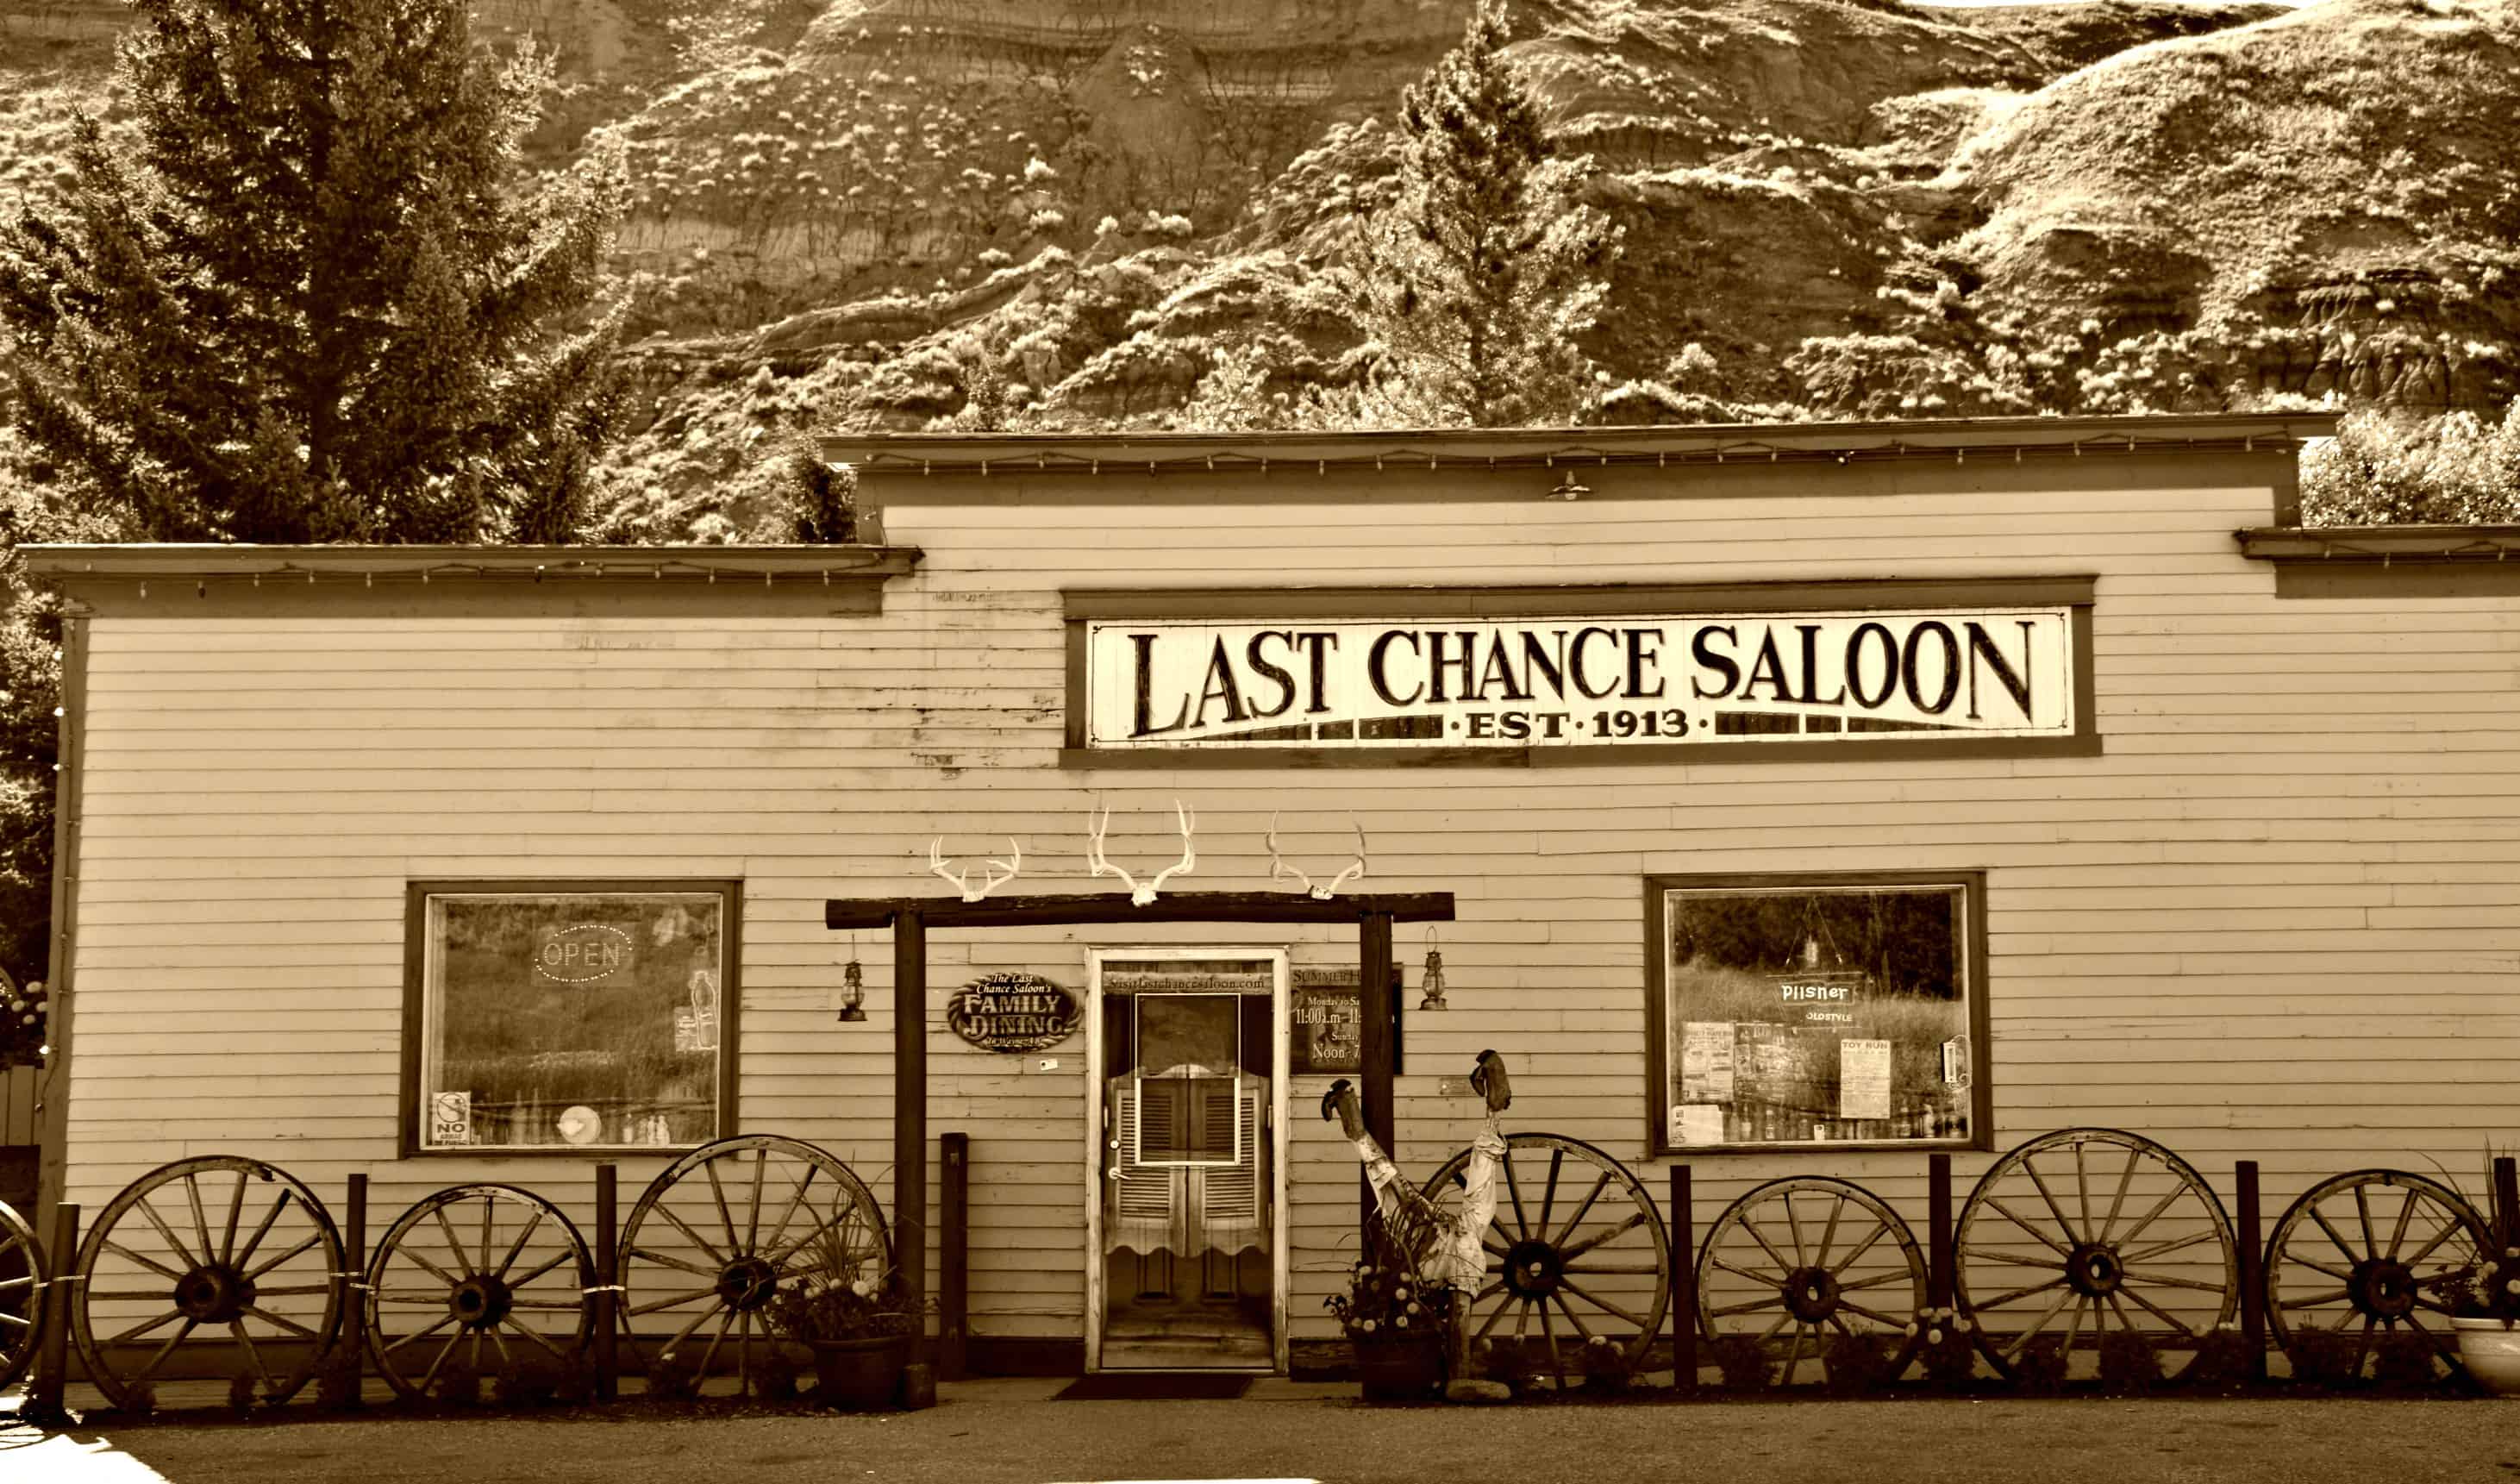 Last Chance Saloon - a great stop on the Hoodoo Trail